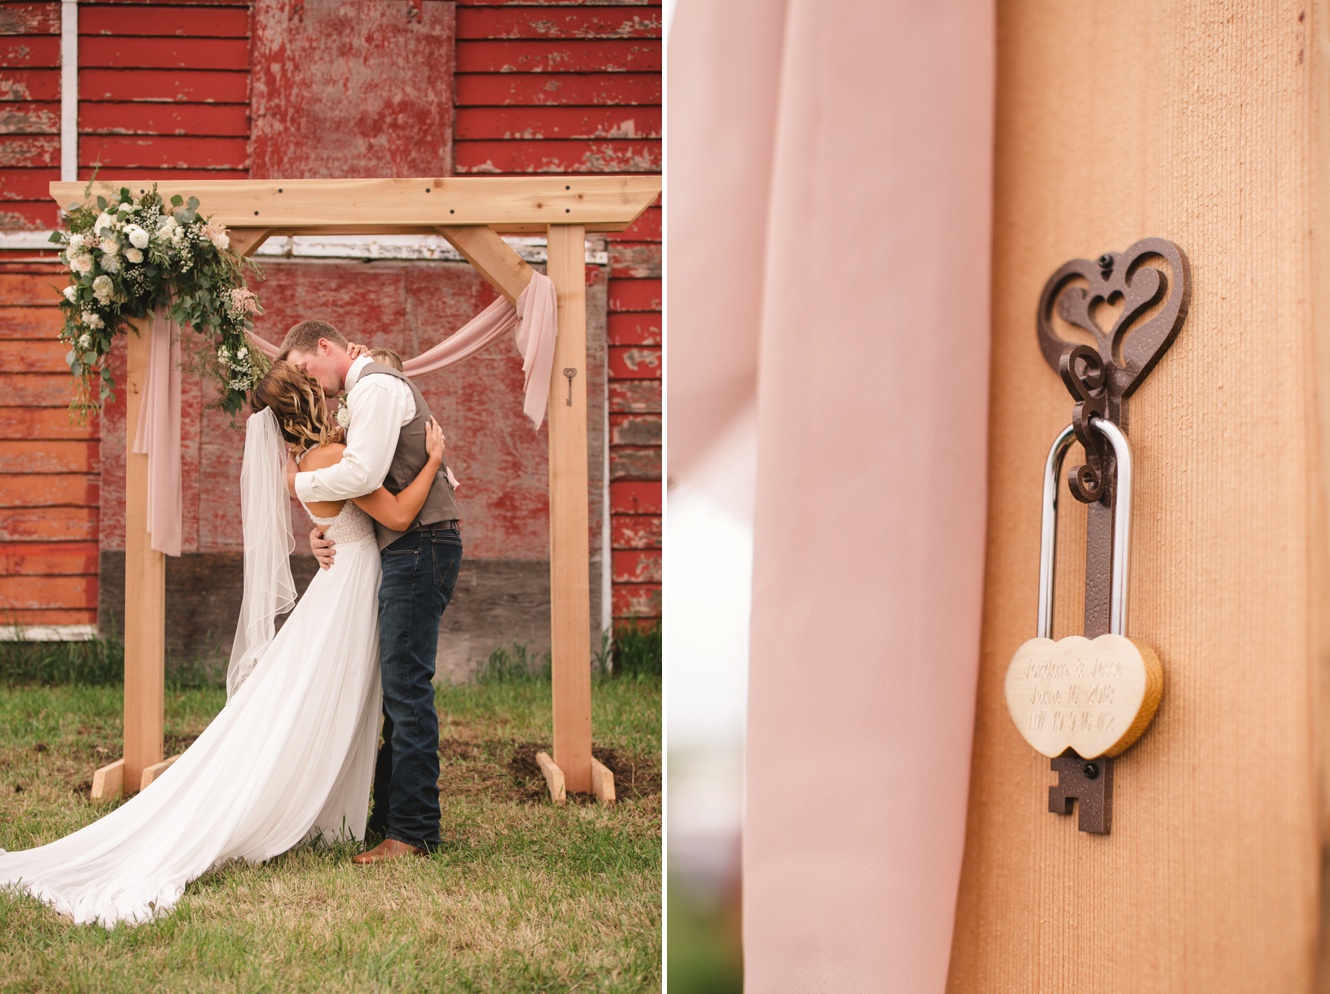 How to perform a lock ceremony at your wedding photo